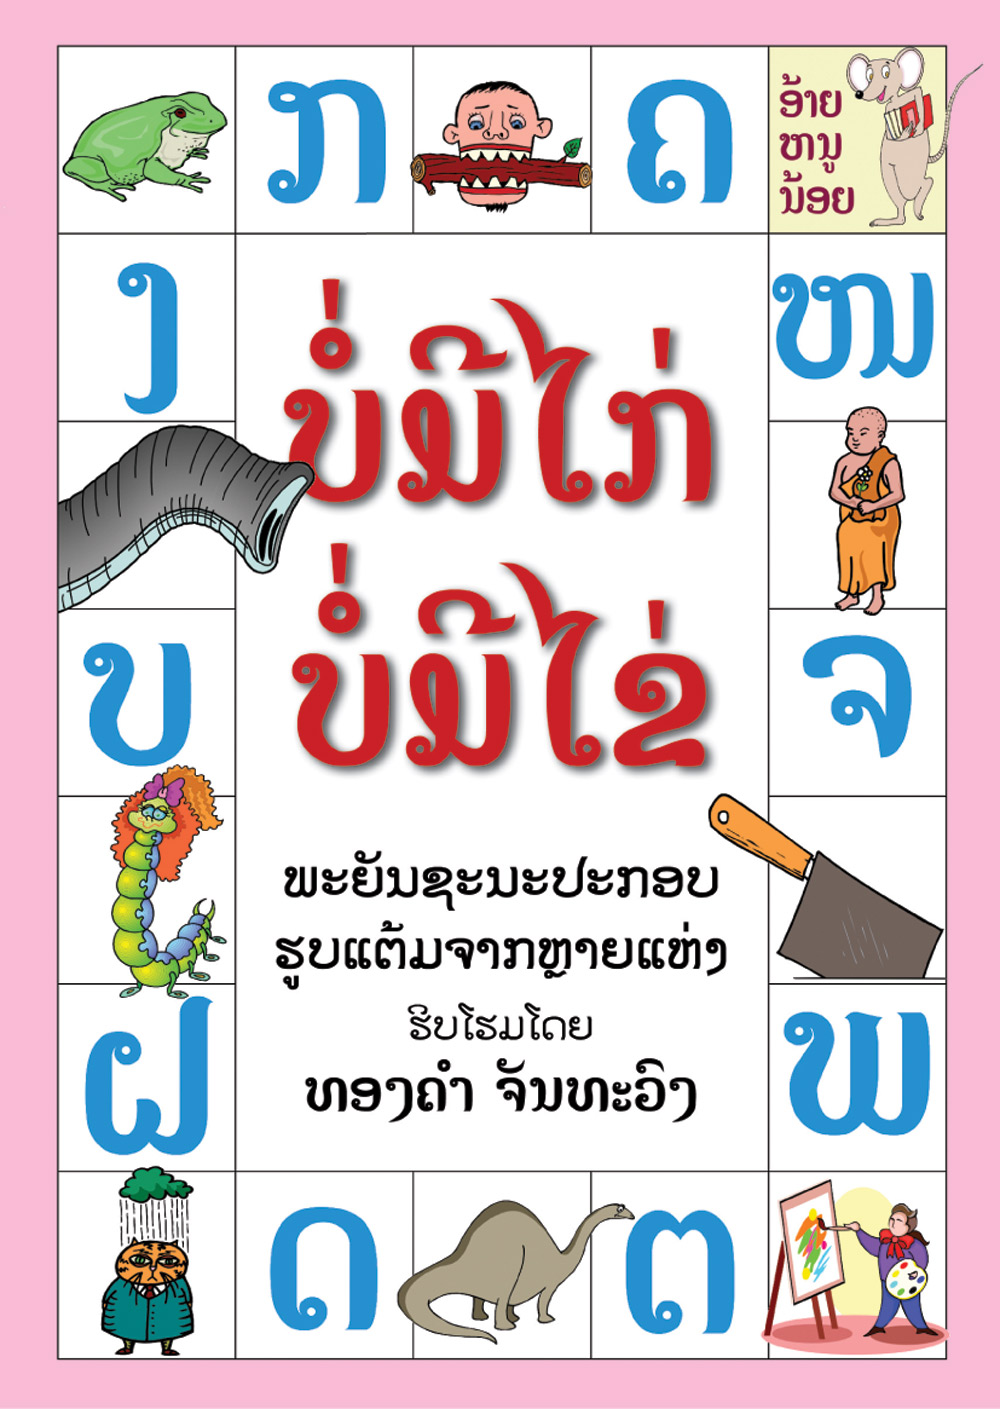 No Chickens, No Eggs large book cover, published in Lao language